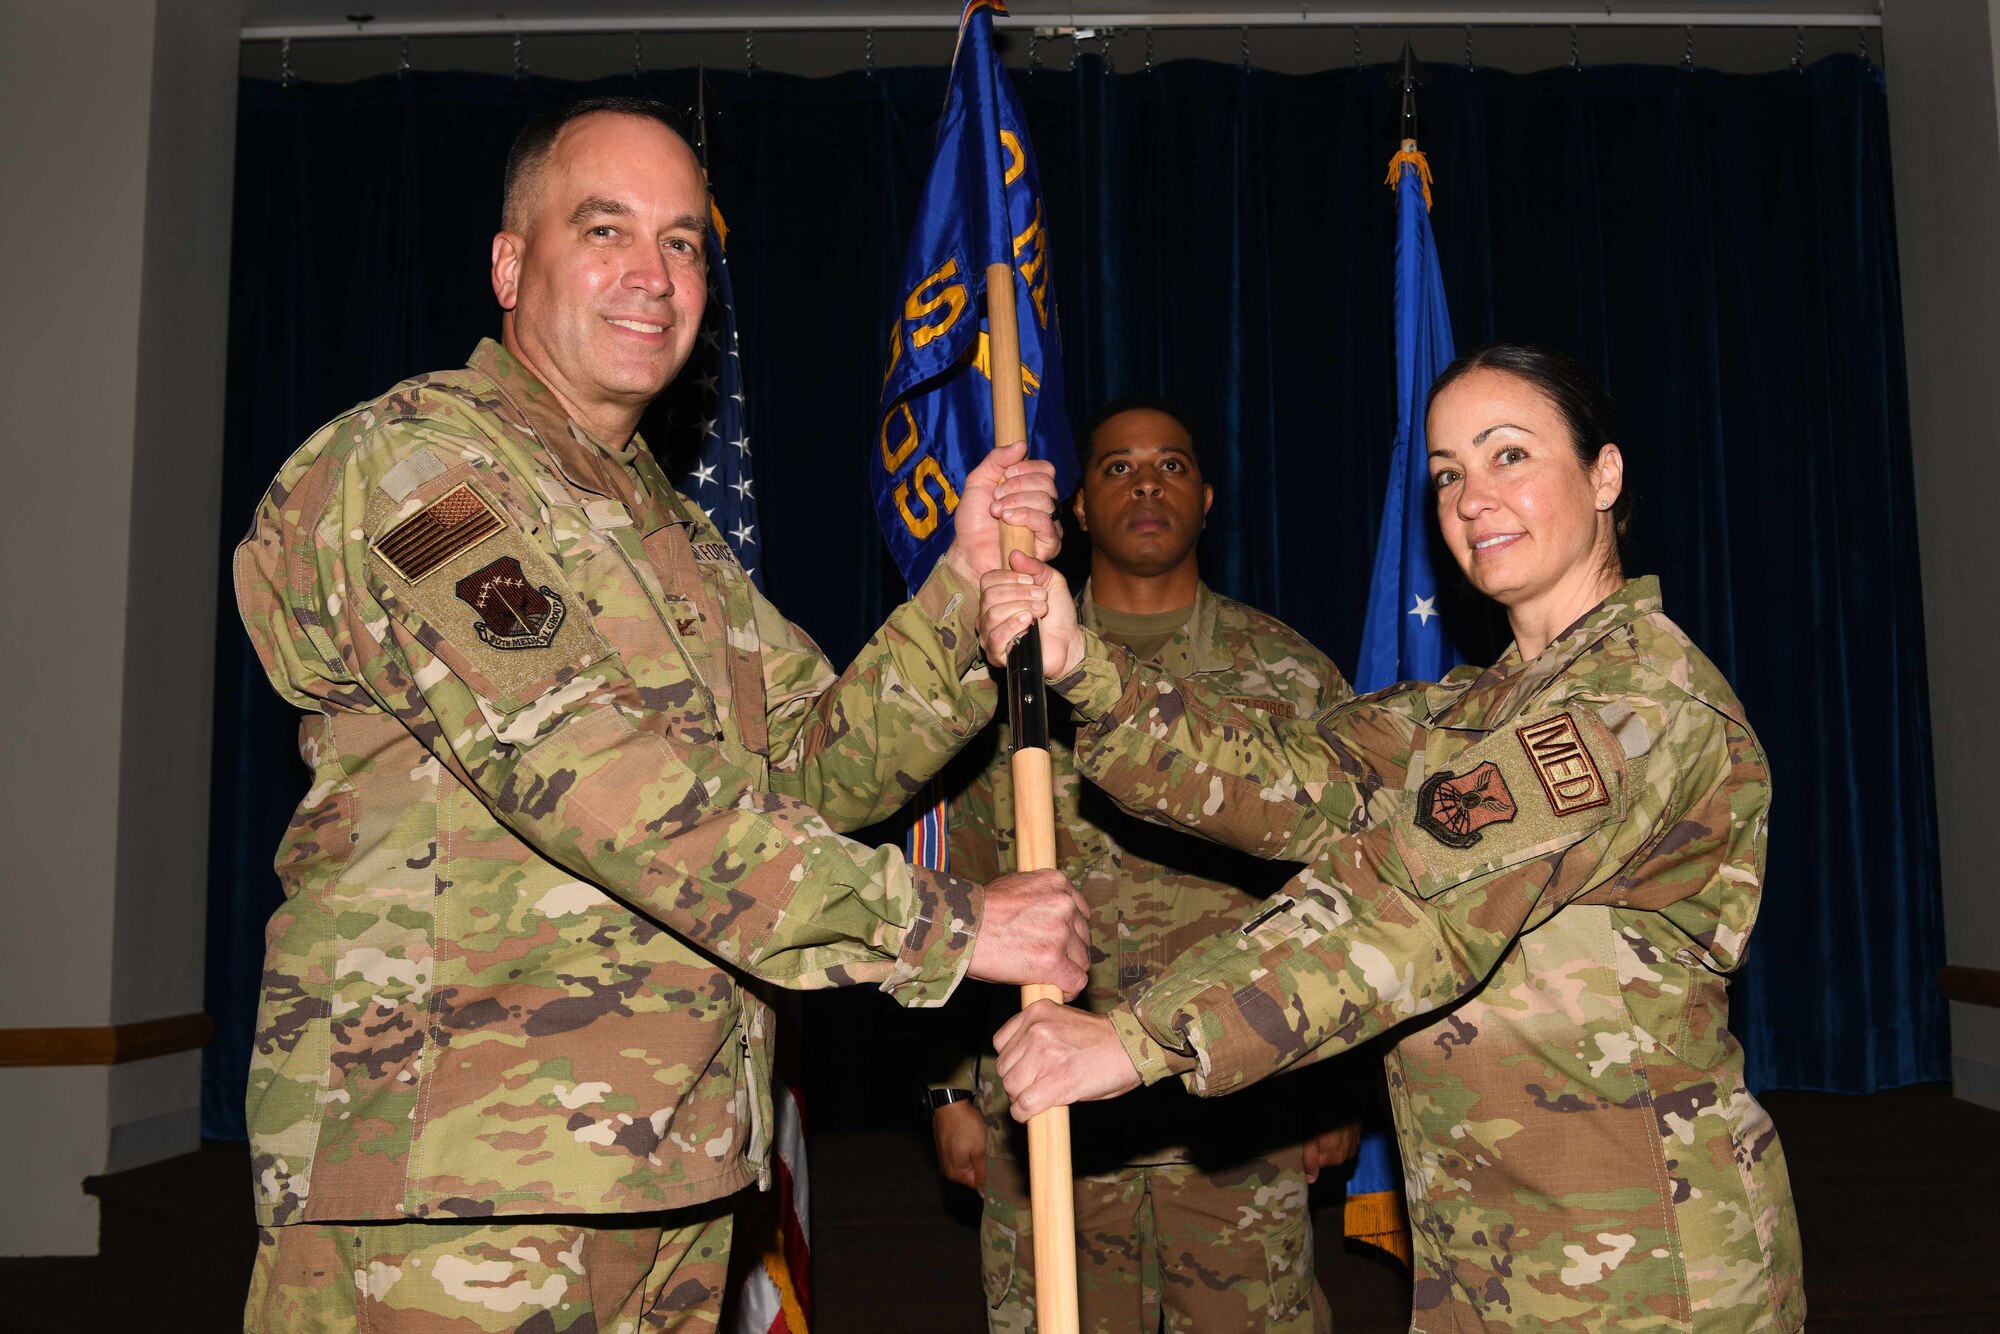 Col. Paul Toth, 90th Medical Group commander, passes the guidon to Lt. Col. Deborah Willis, 90th Healthcare Operations Squadron, during the 90 HCOS change of command ceremony July 1, 2021, at Trails End on F.E. Warren Air Force Base, Wyoming. The ceremony signified the transition of command from Col. David Barker to Willis. (U.S. Air Force photo by Airman 1st Class Charles Munoz)